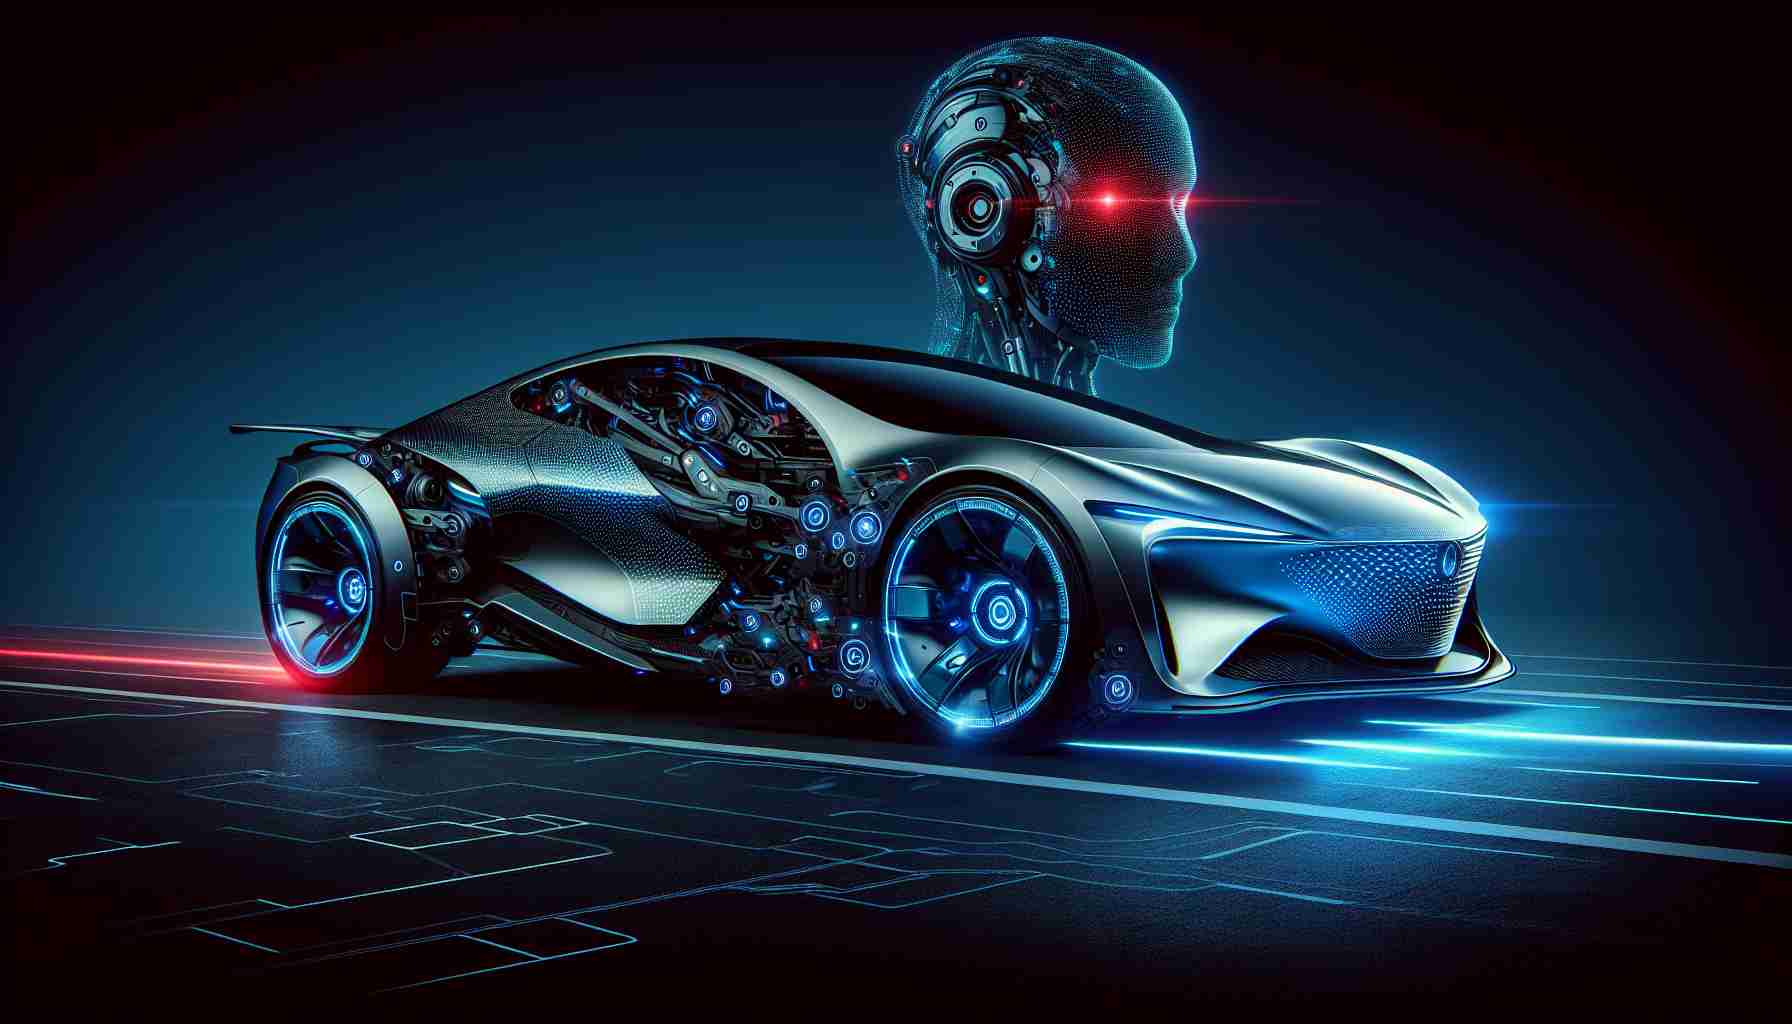 The Future Ride of 007: Artificial Intelligence Weighs In on James Bond ...